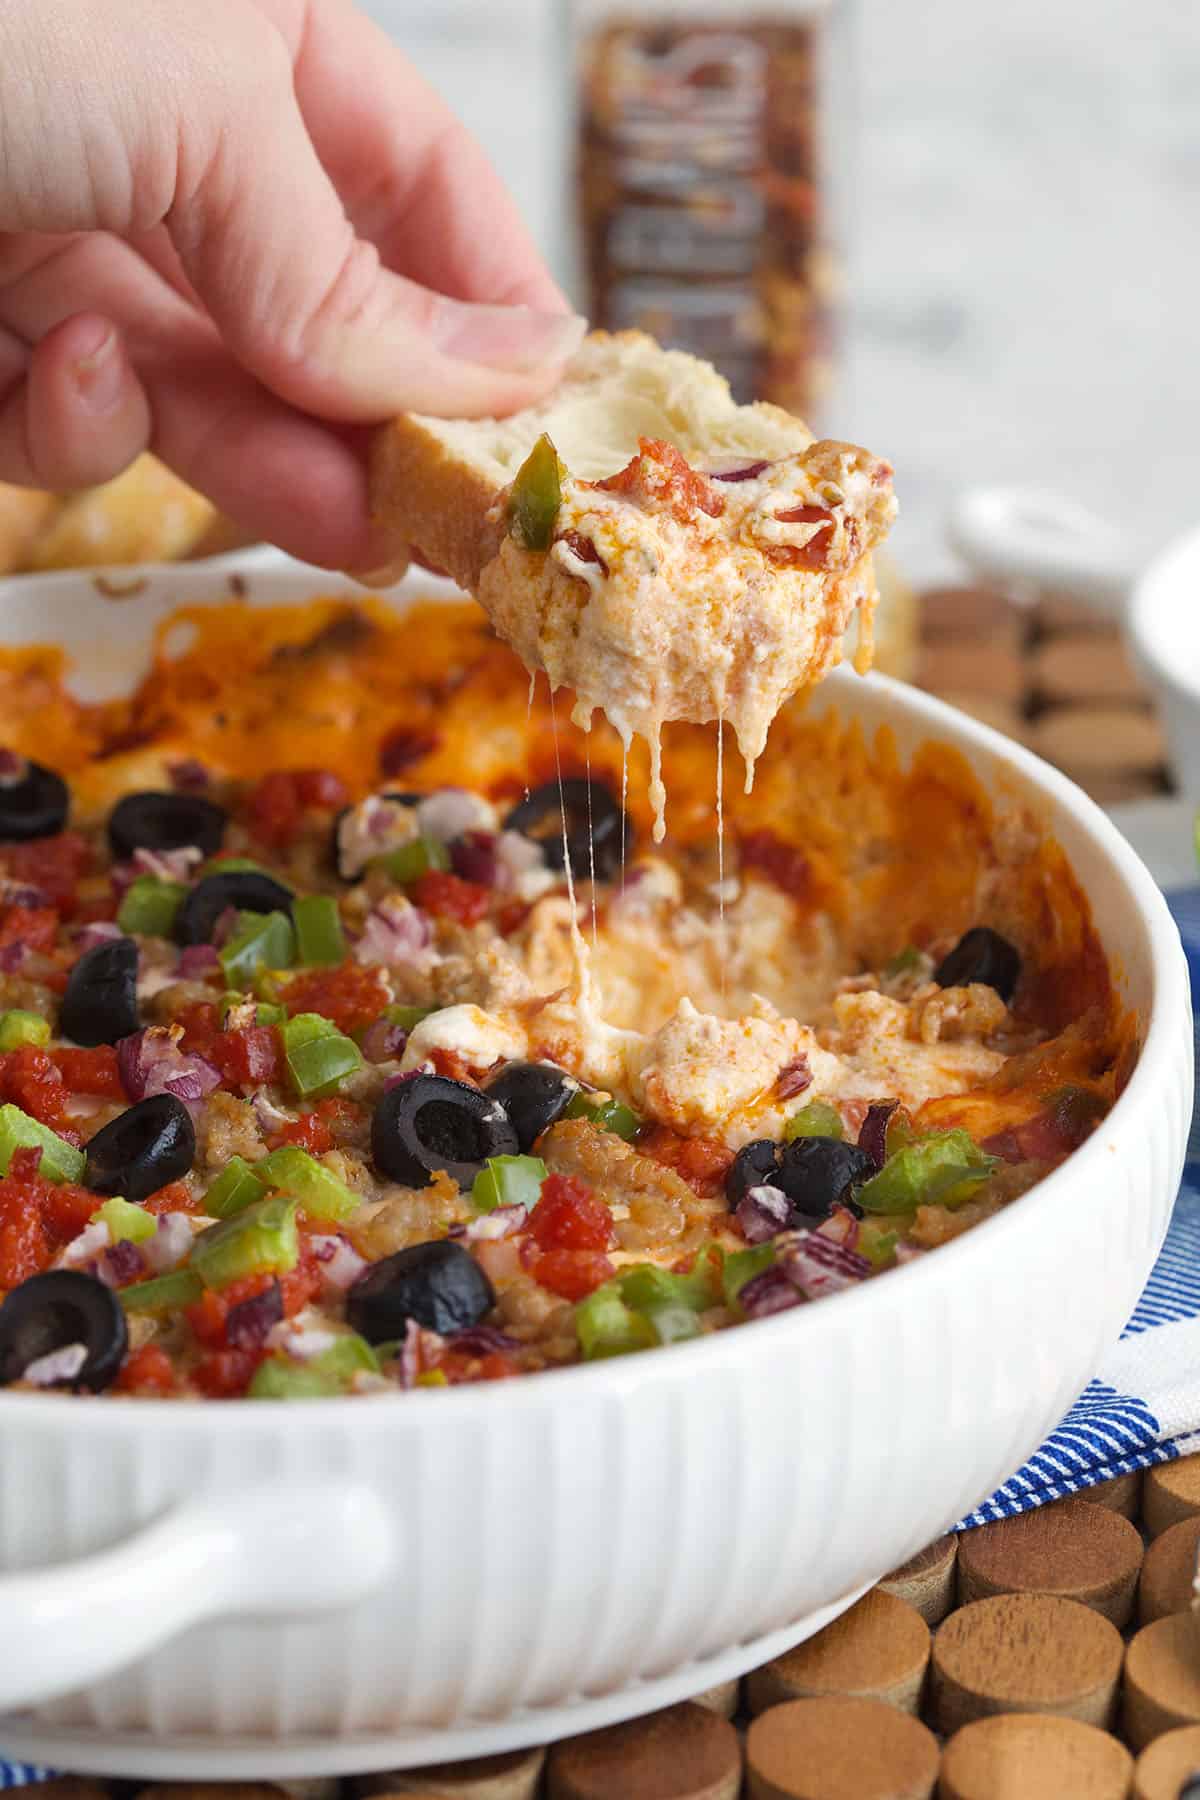 Pizza dip in a white casserole with a hand dipping a crostini into it with a cheese pull into the dish.